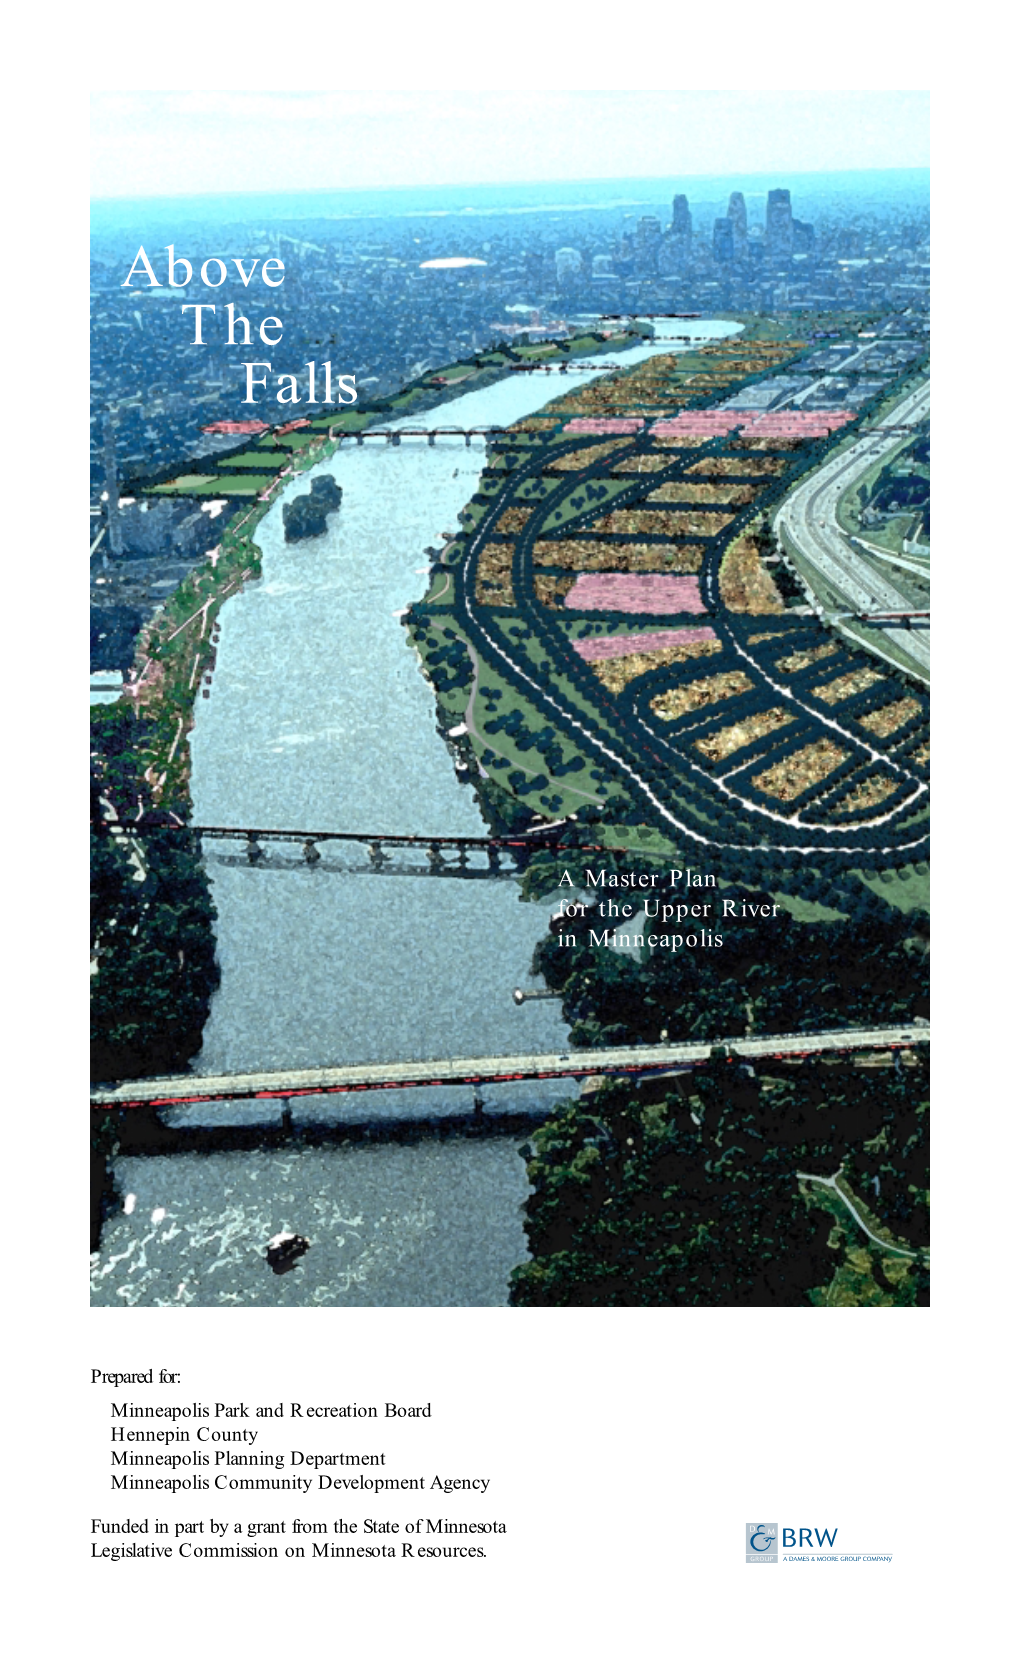 Above the Falls – a Master Plan for the Upper River in Minneapolis